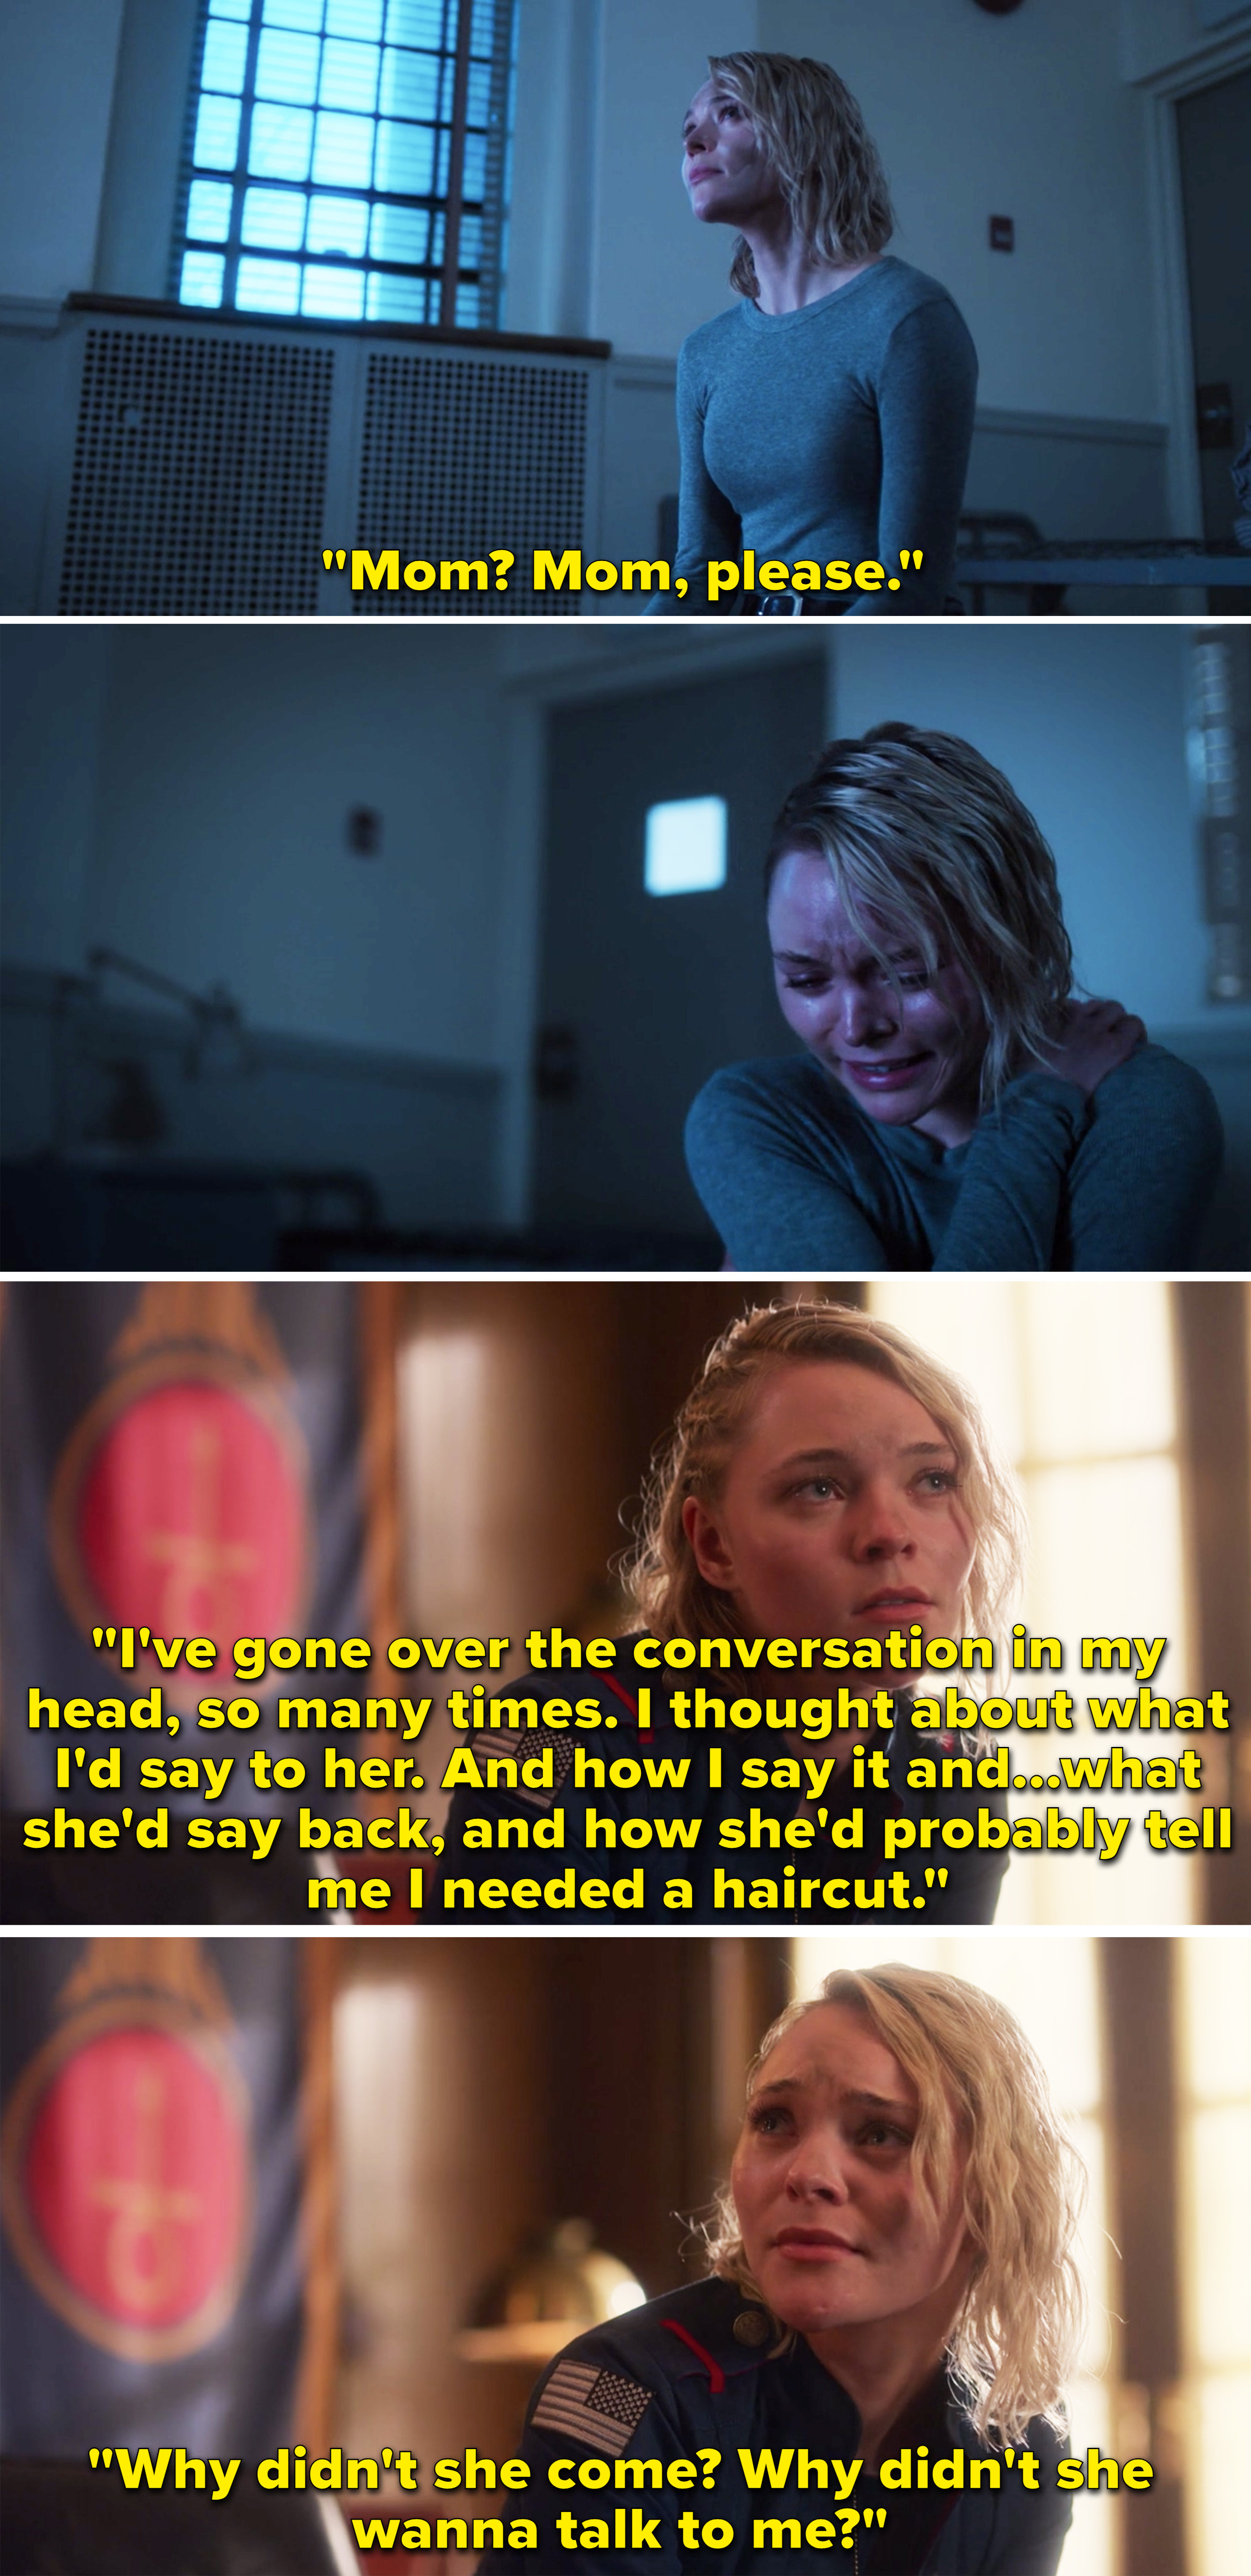 Raelle crying and saying she thought about the conversation she&#x27;d have with her mom and wondering why she didn&#x27;t come